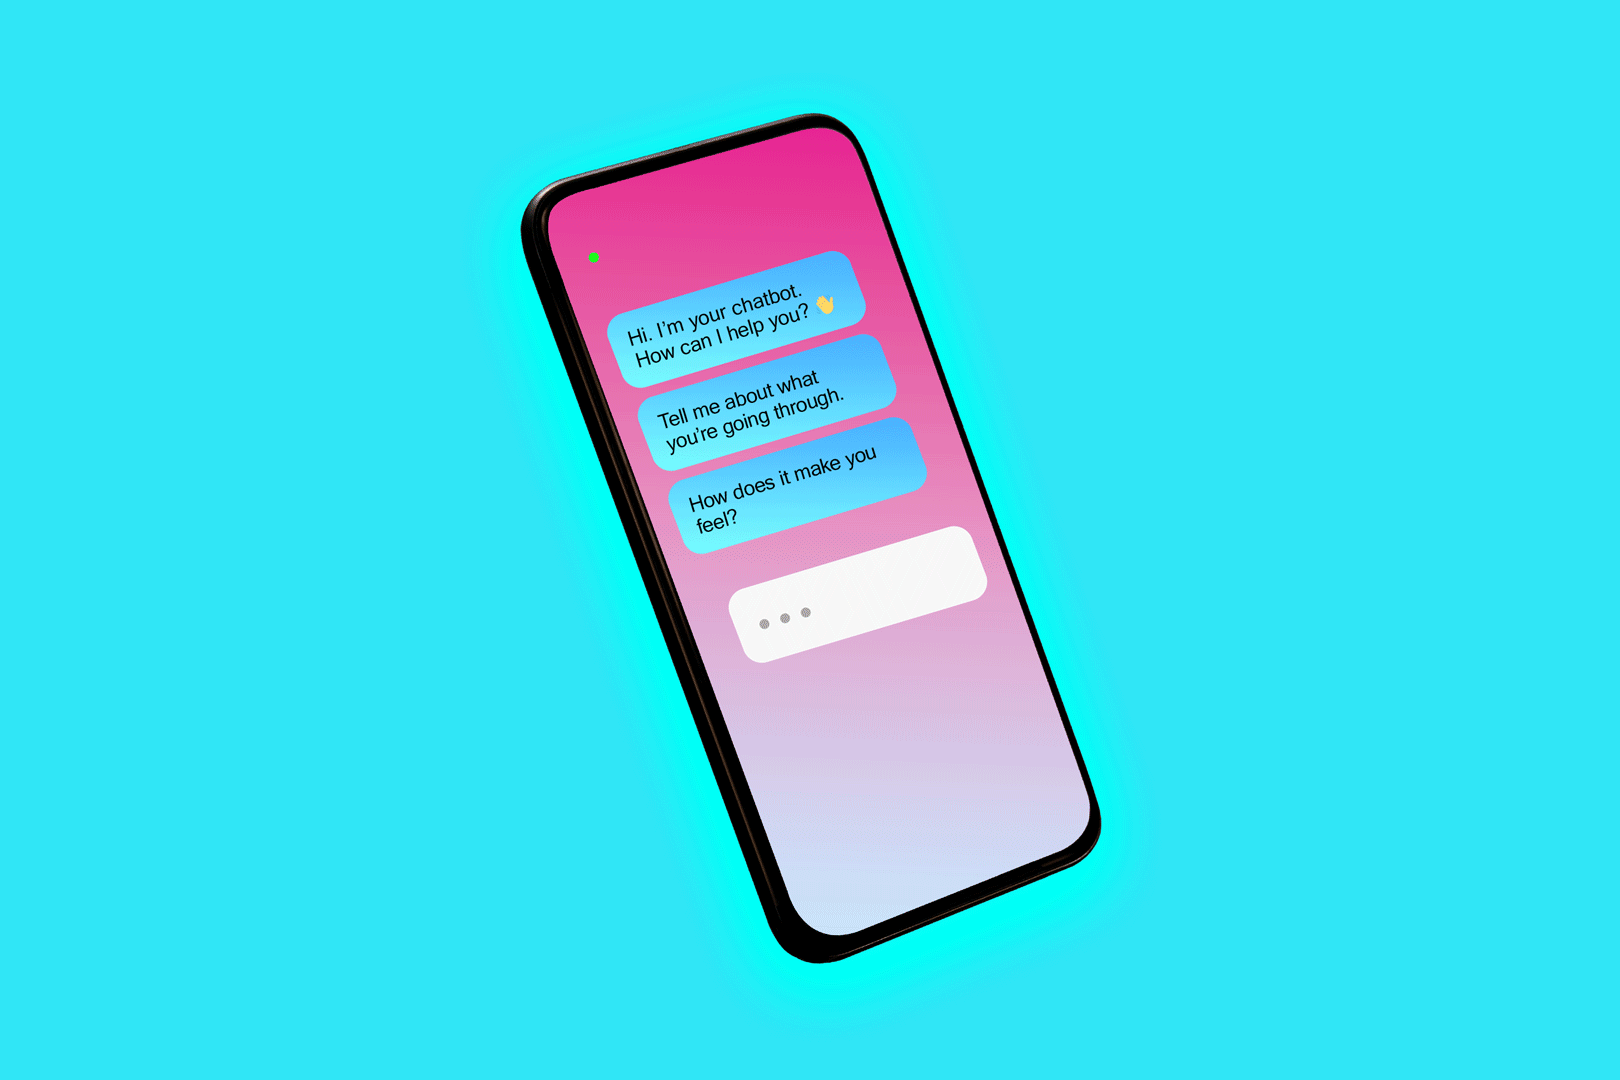 Illustration of a phone screen with messages from a chatbot therapist. "Tell me about what you're going through."